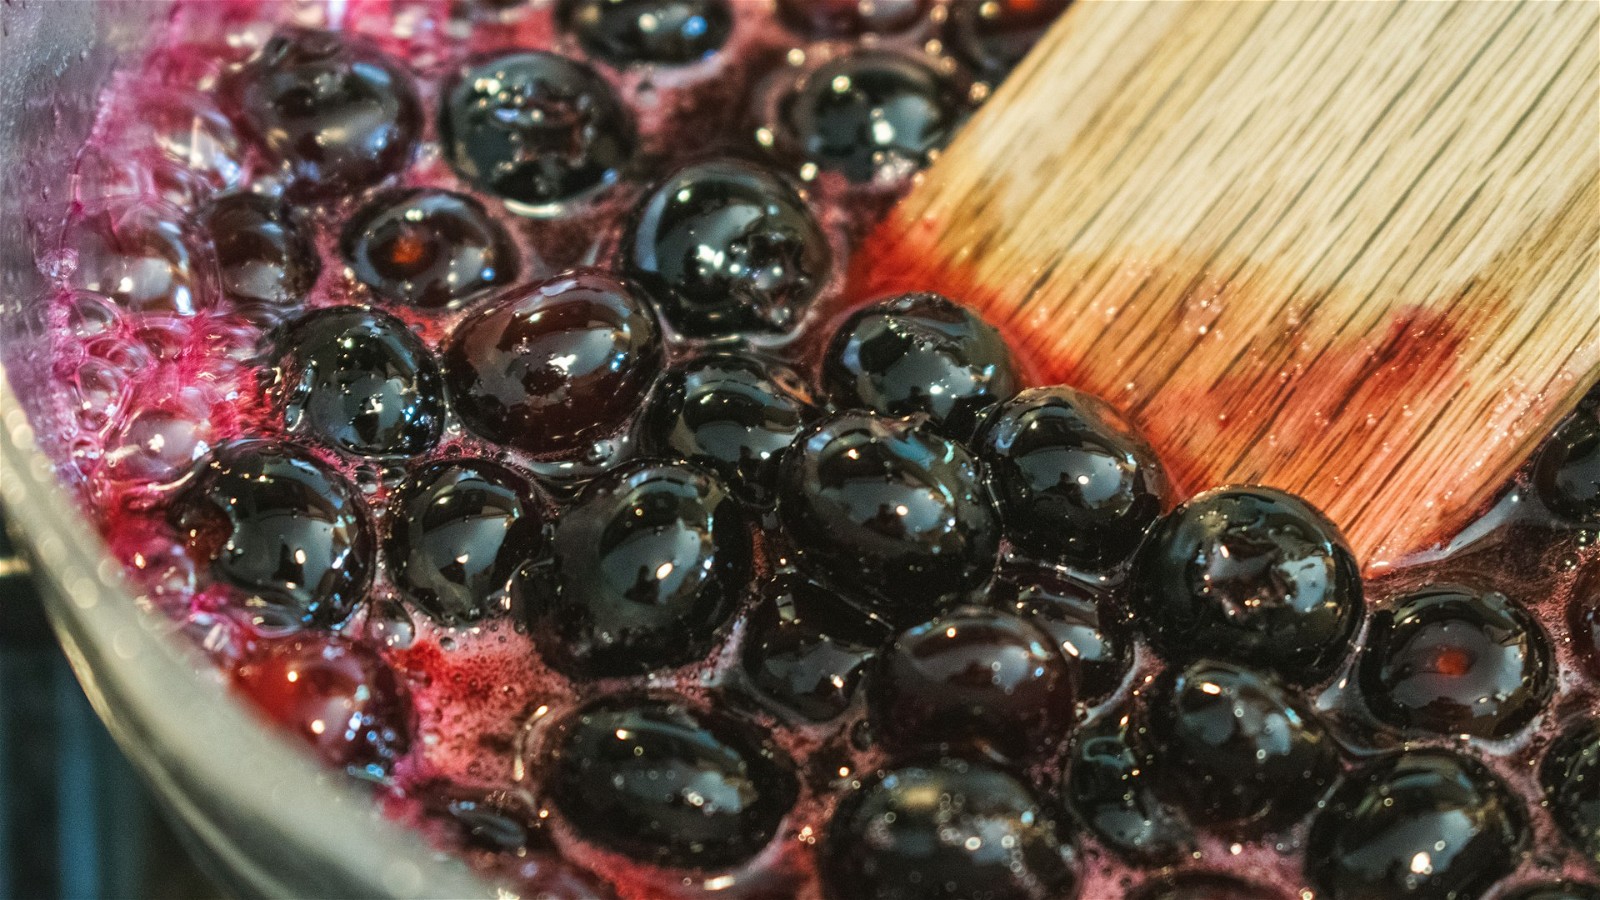 Image of Spiced Mixed Berry Compote